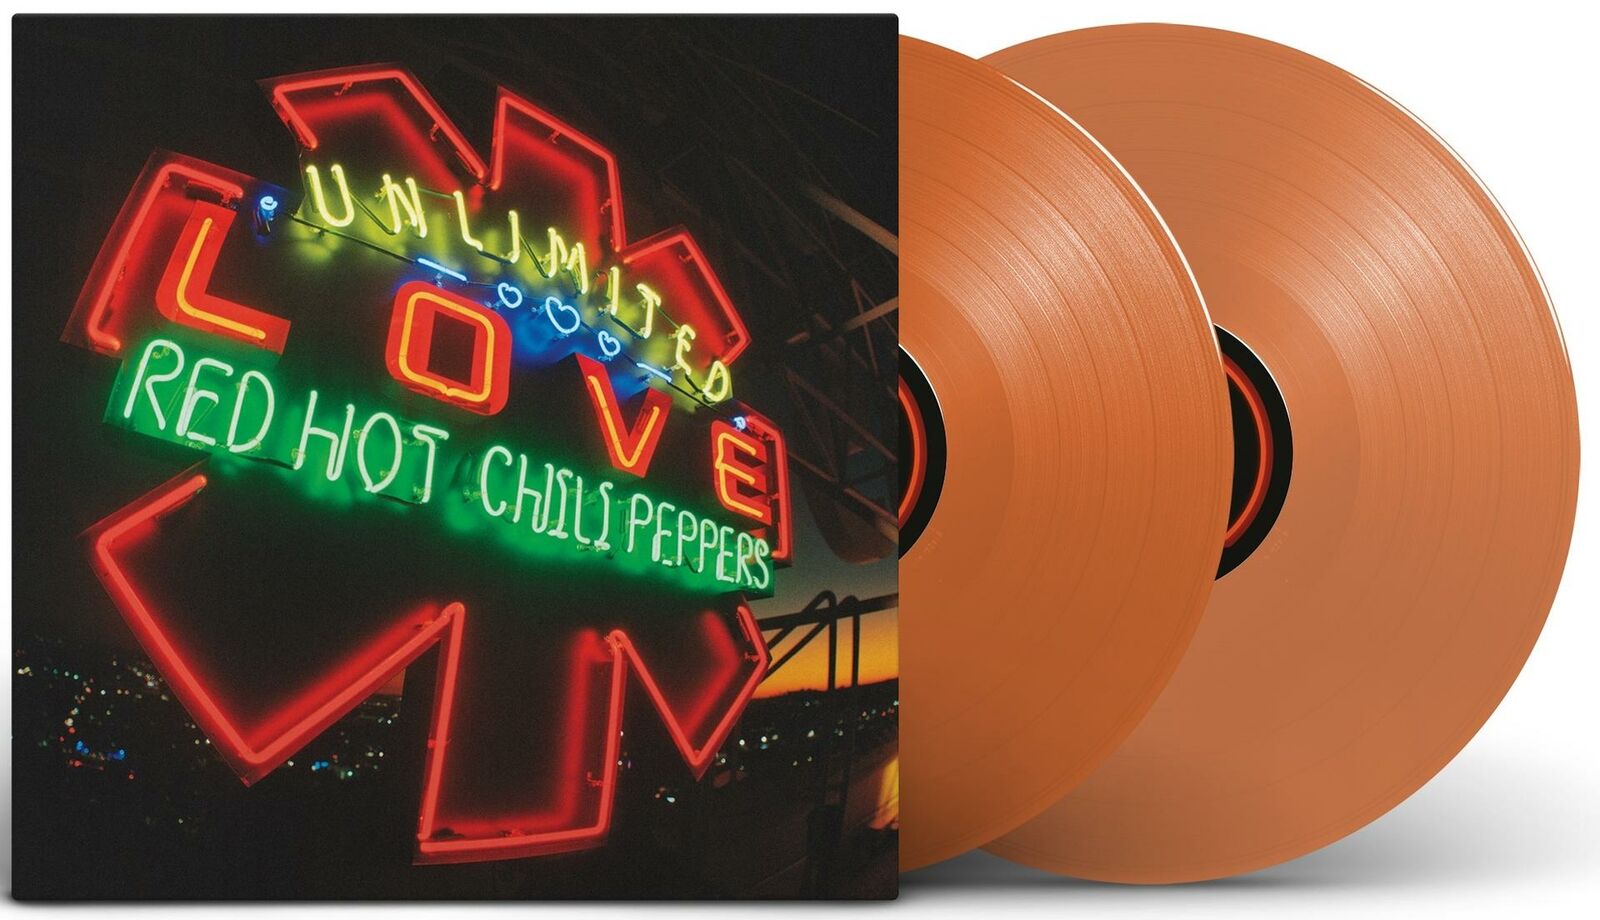 RED HOT CHILI PEPPERS 'UNLIMITED LOVE' 2LP (Orange Vinyl)